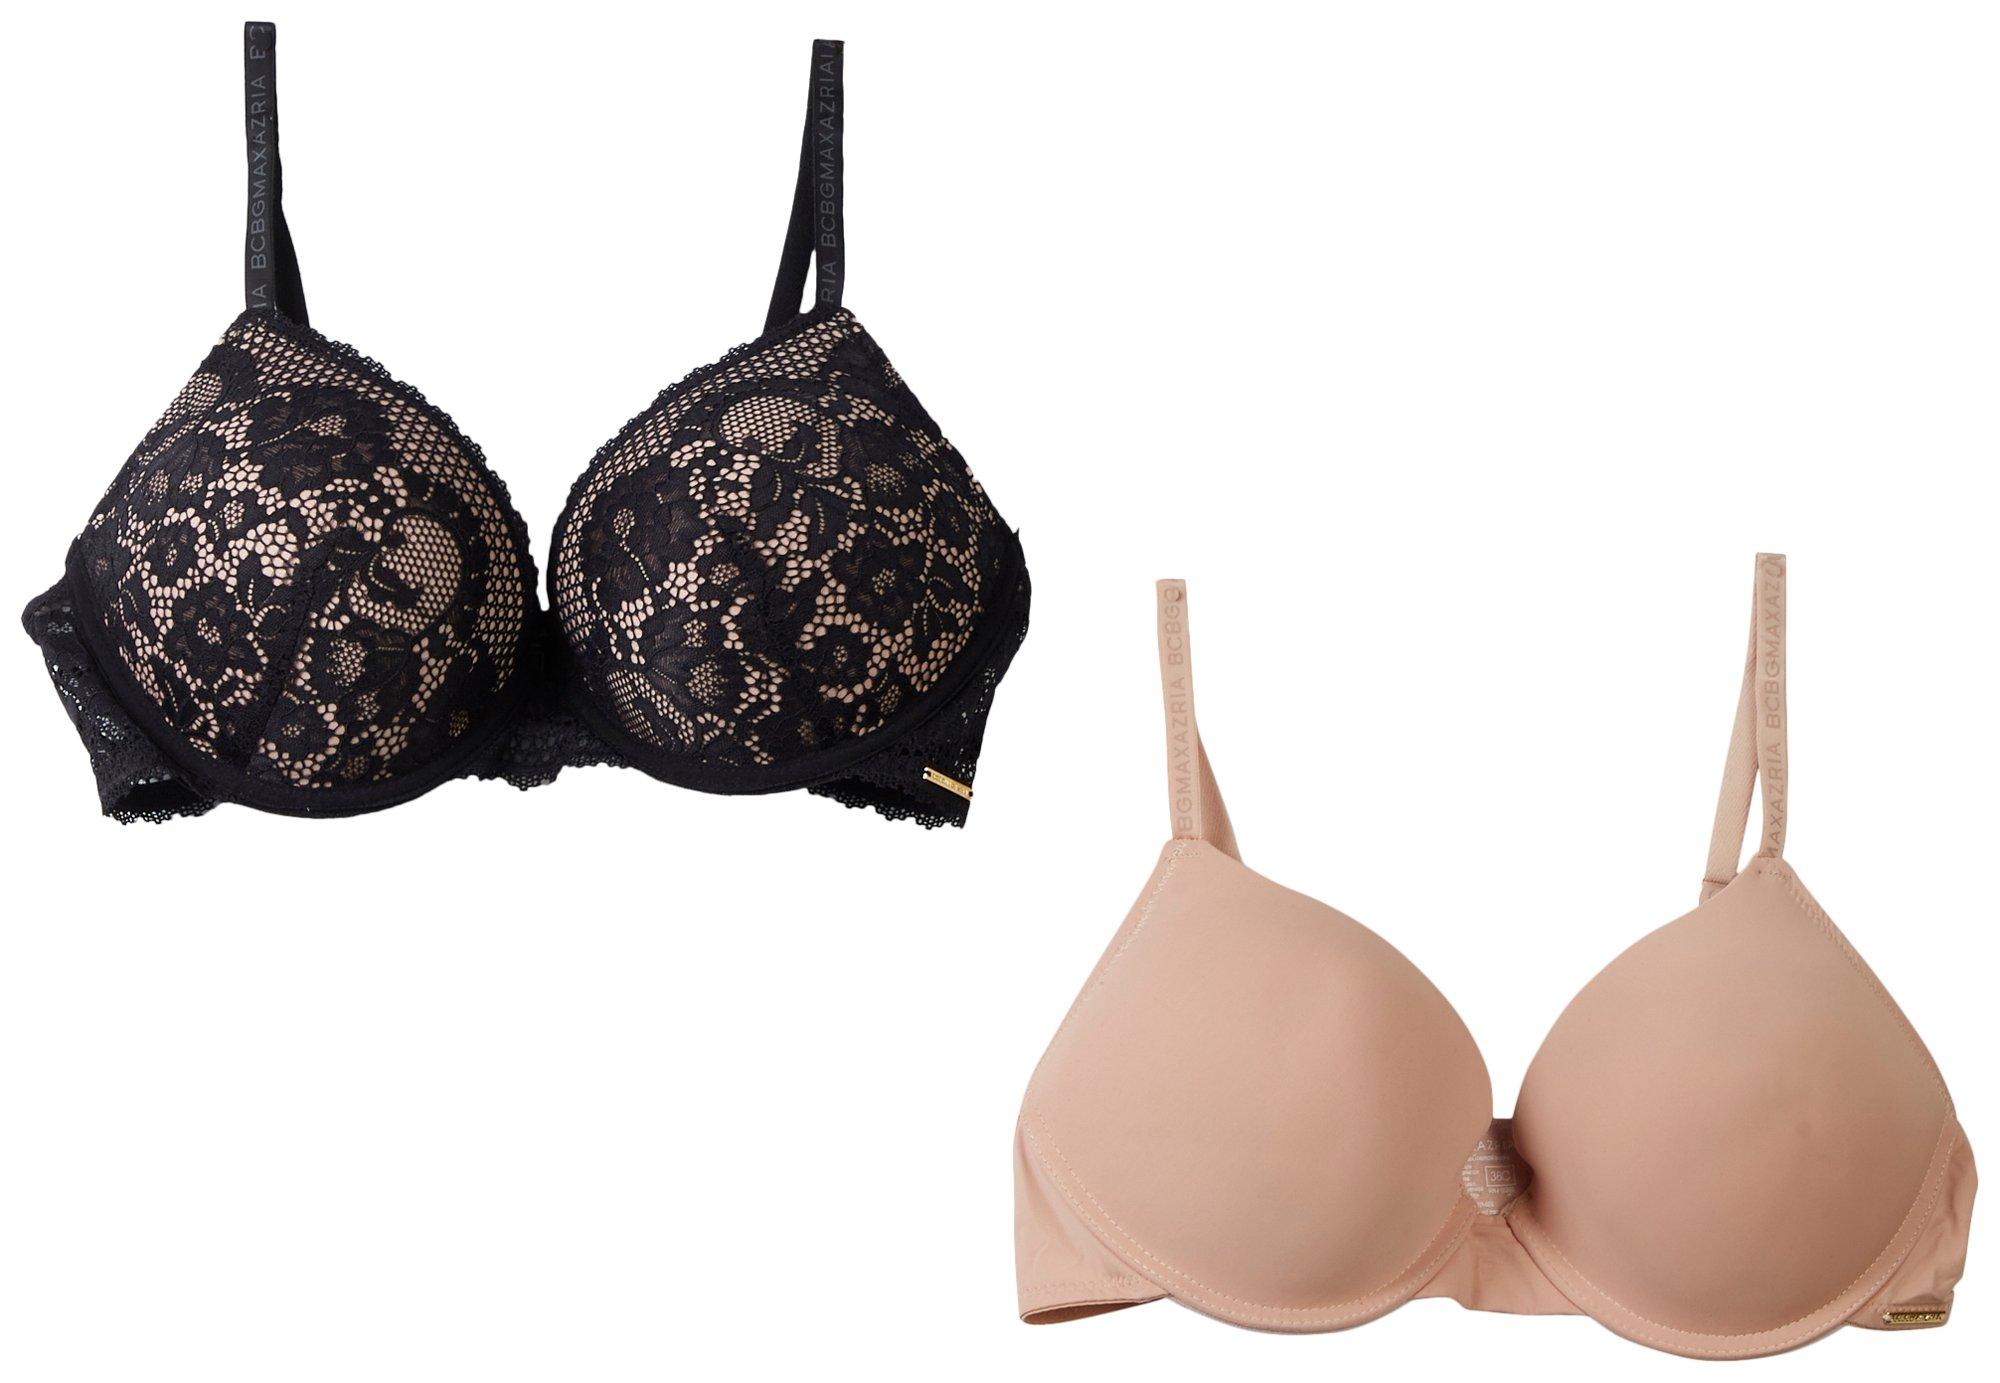 Juicy Couture, Intimates & Sleepwear, Juicy Couture 2pk Sexy Push Up Bra  Set